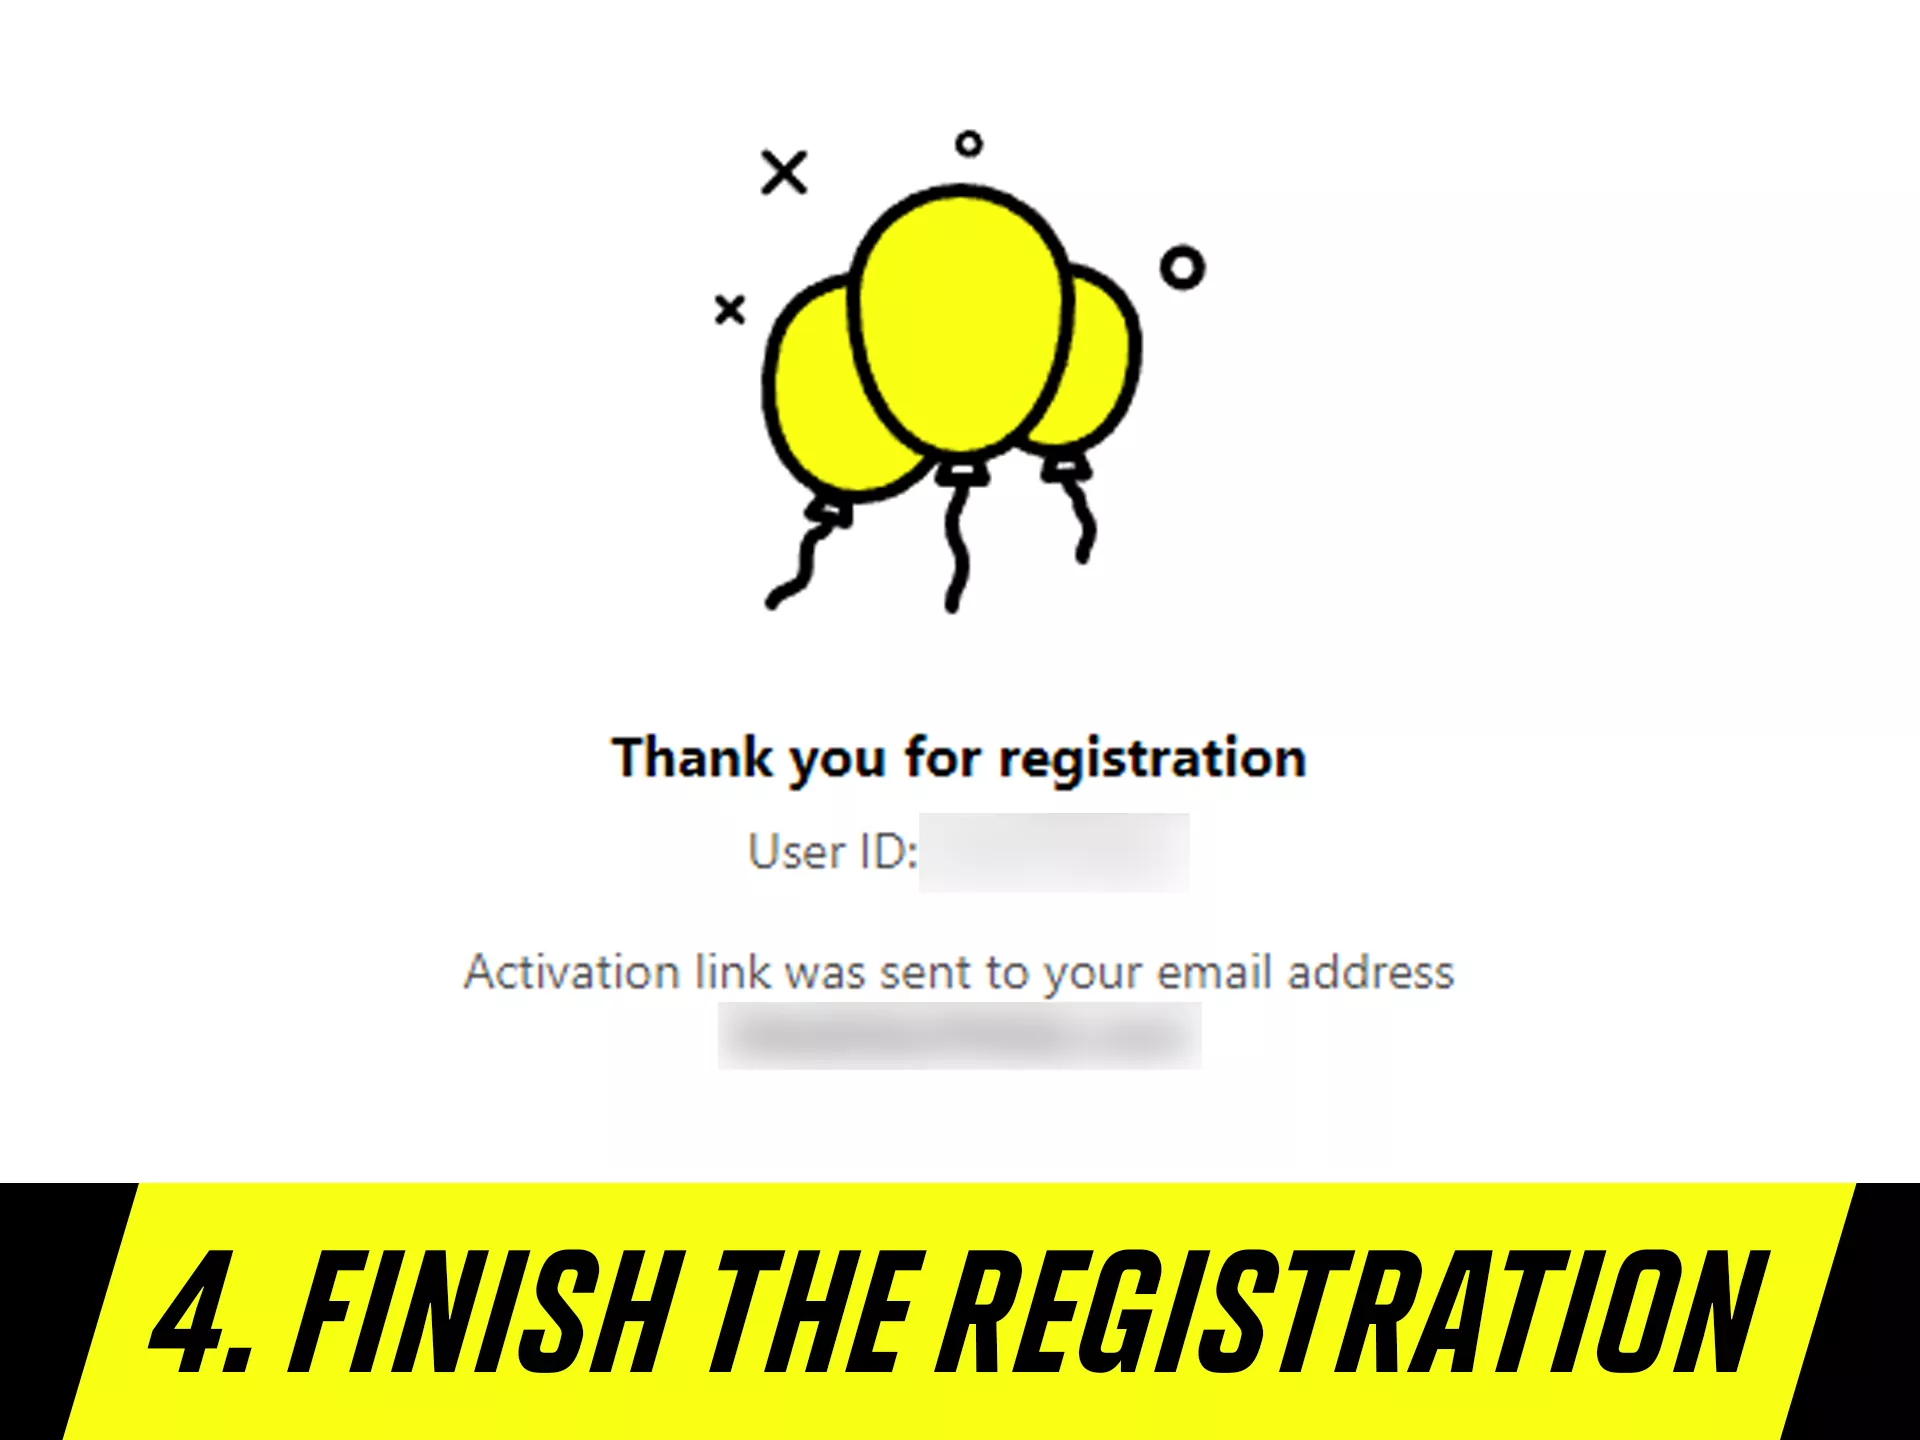 Activate you email after finishing registration.